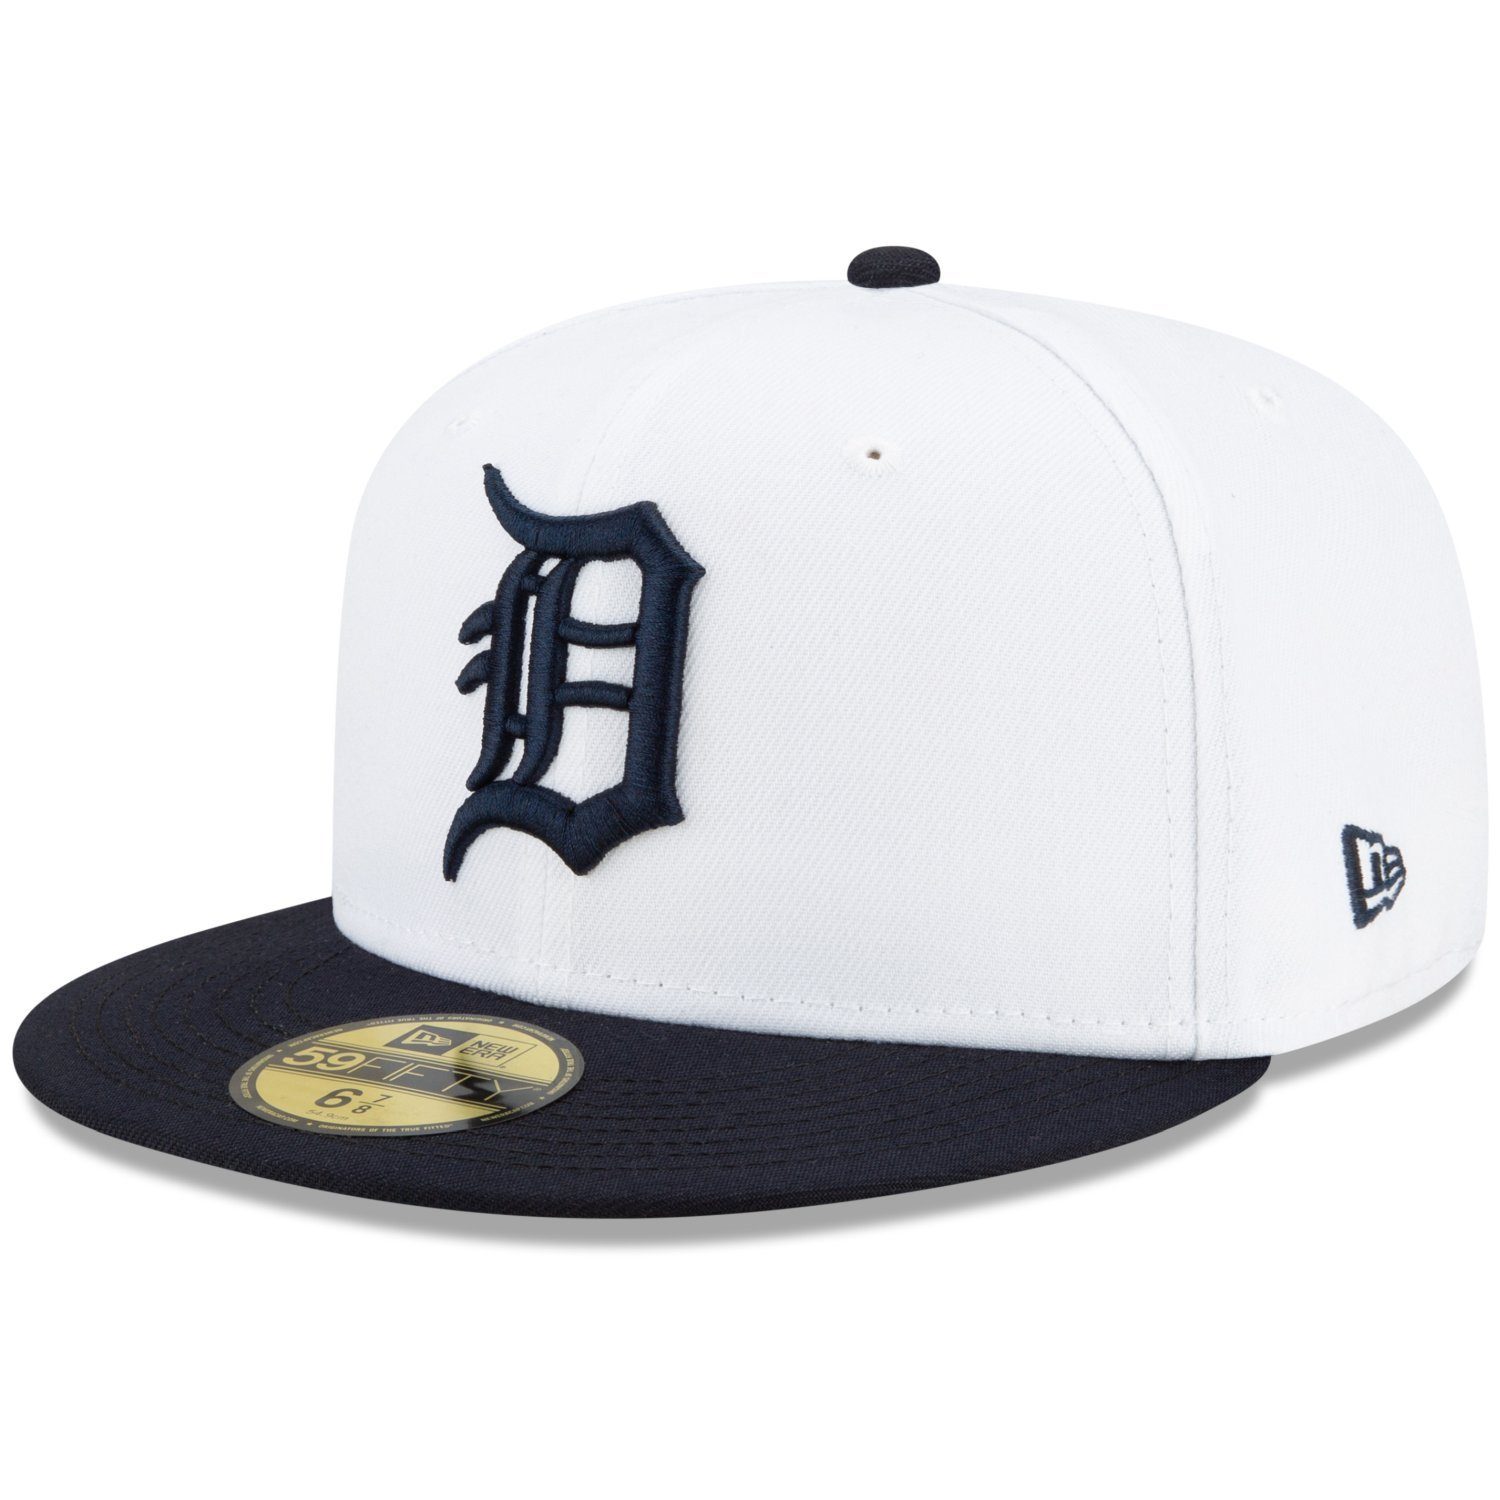 Tigers WORLD 1984 New 59Fifty SERIES Fitted Detroit Era Cap